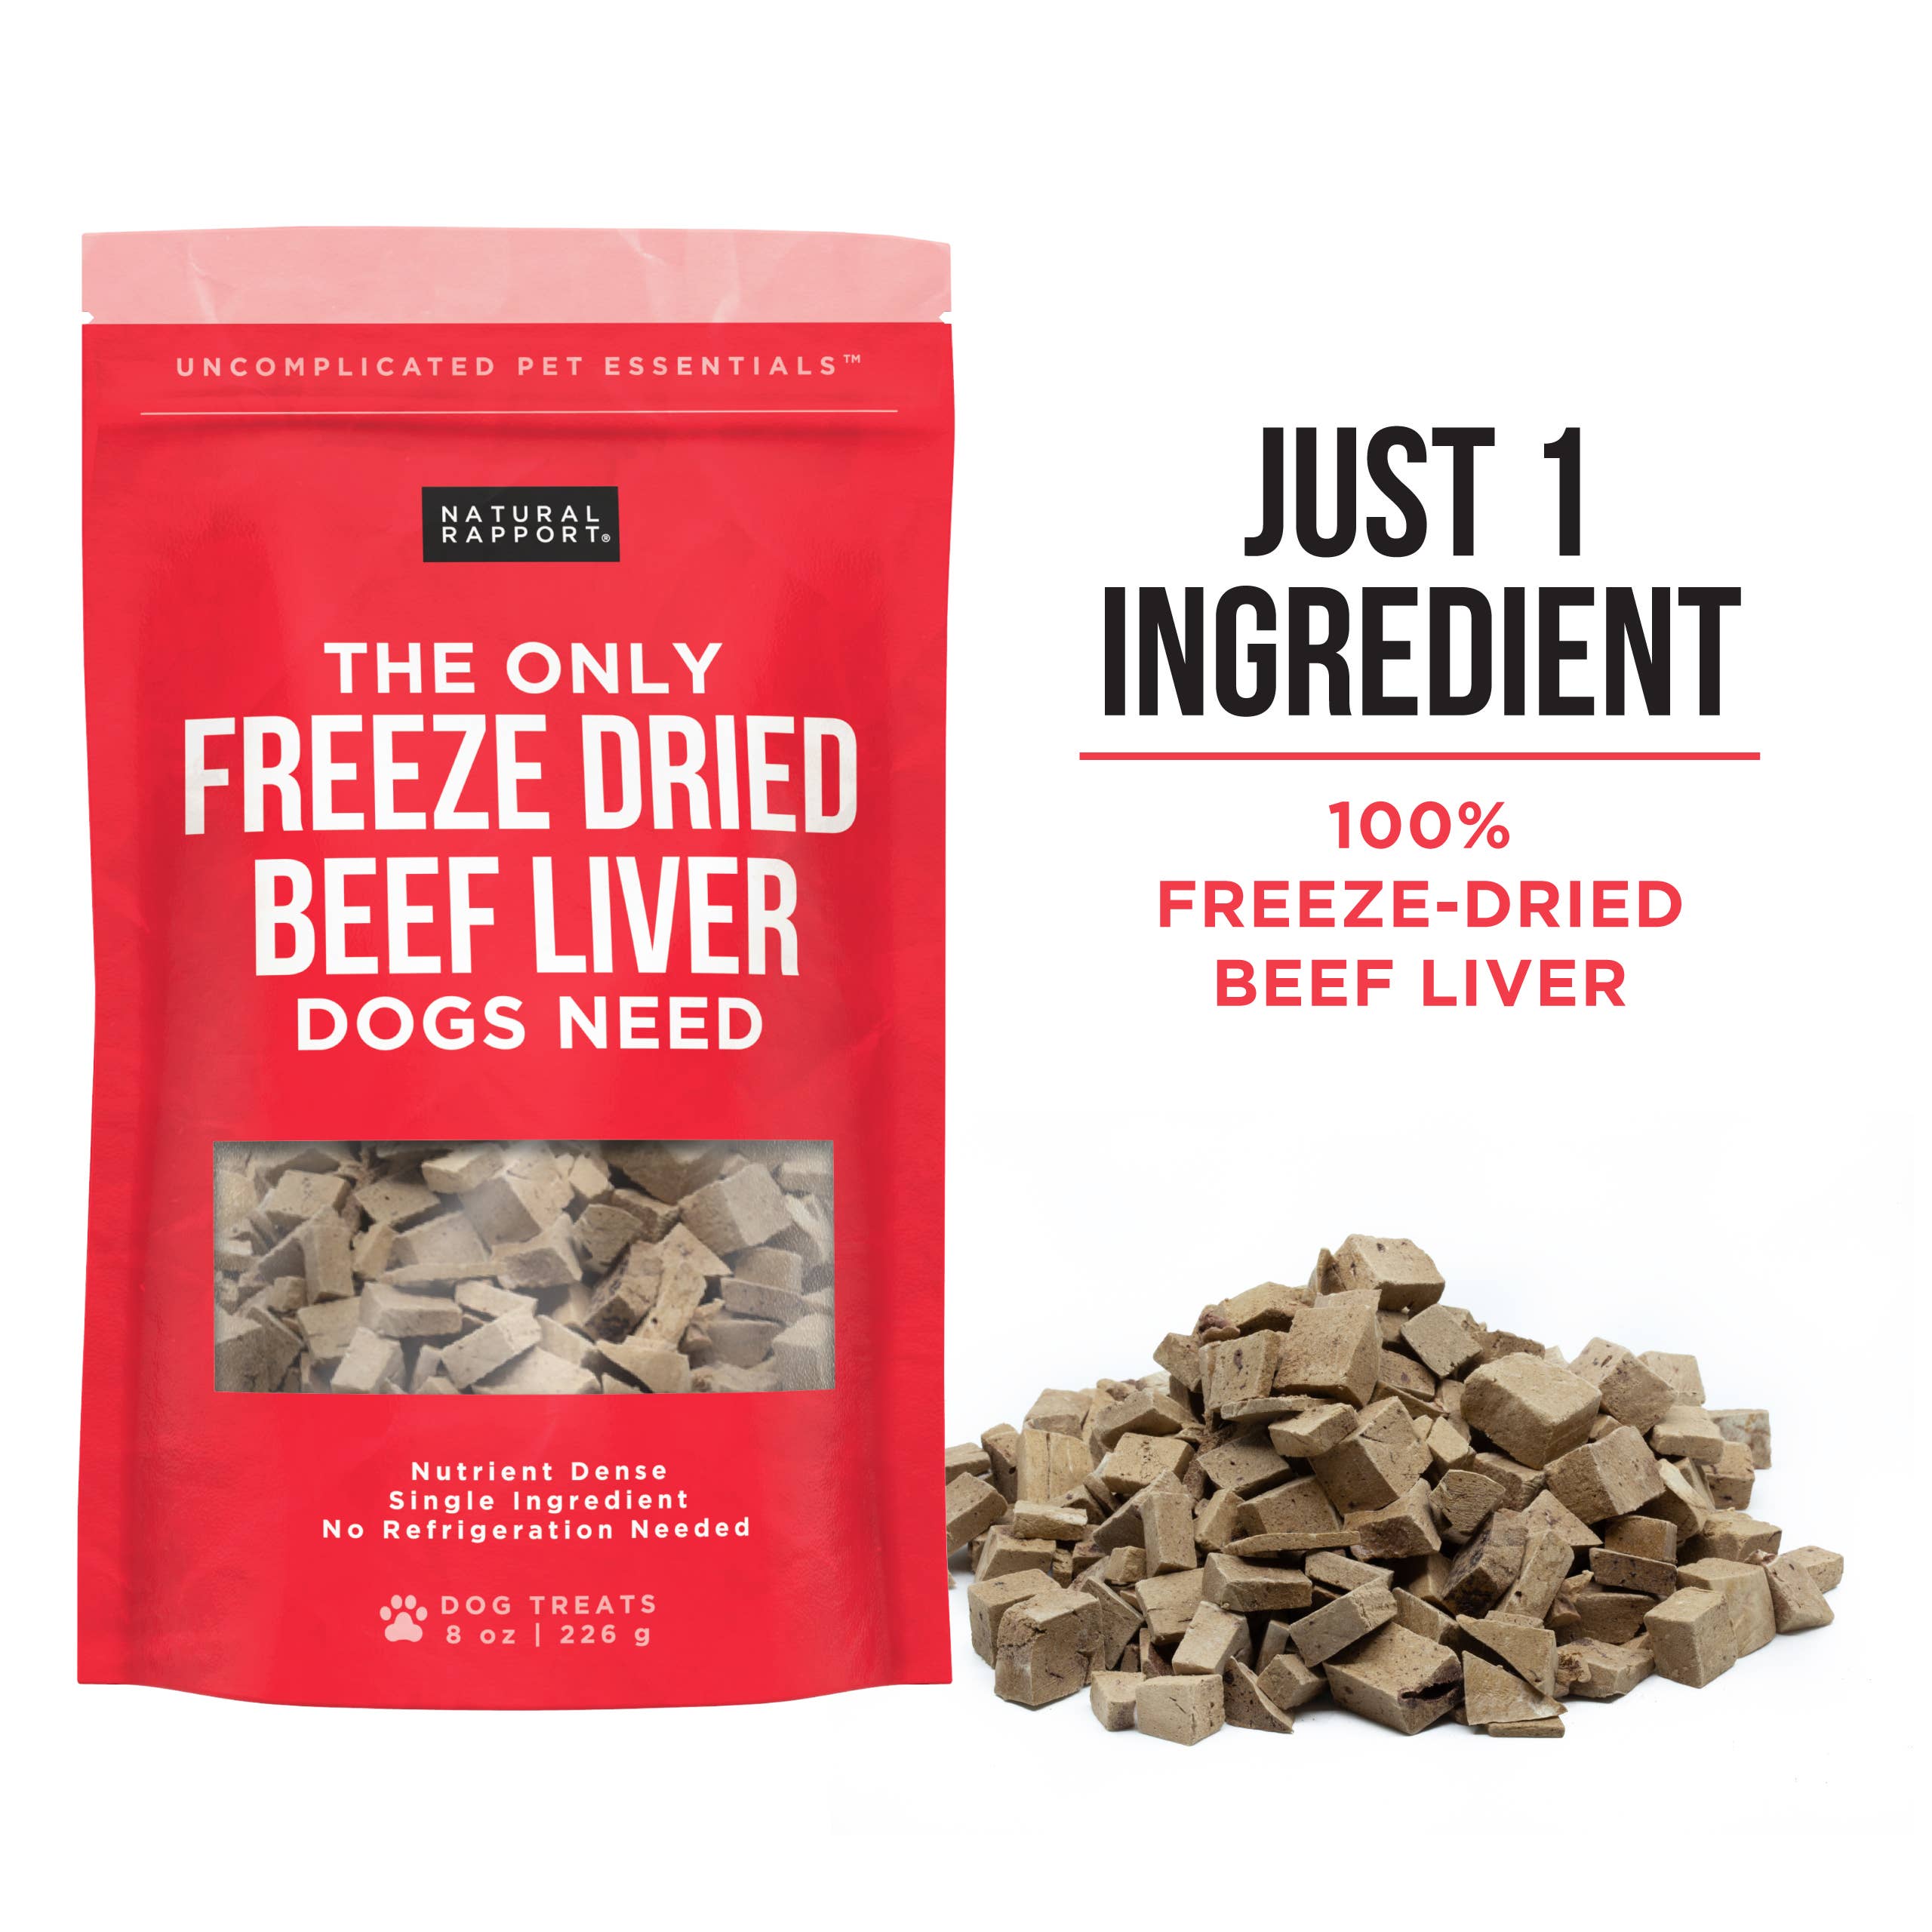 Natural Rapport - The Only Freeze Dried Beef Liver Dogs Need